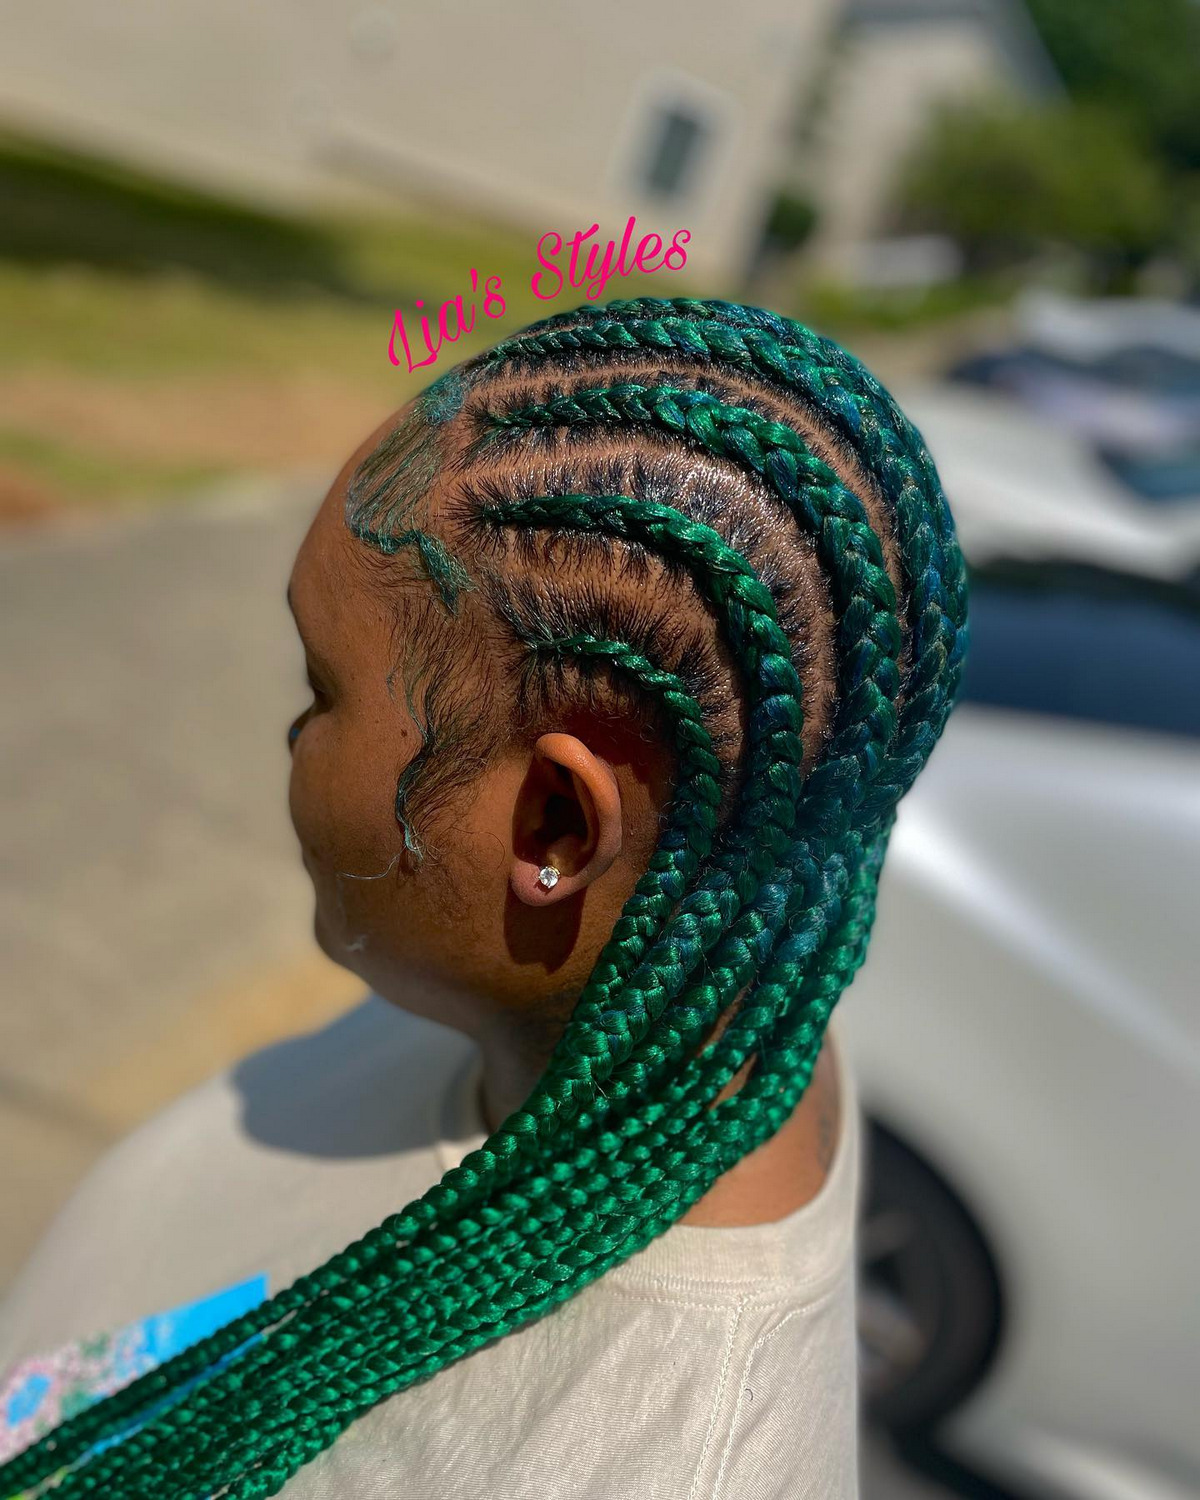 Feed-In Goddess Braids with Color